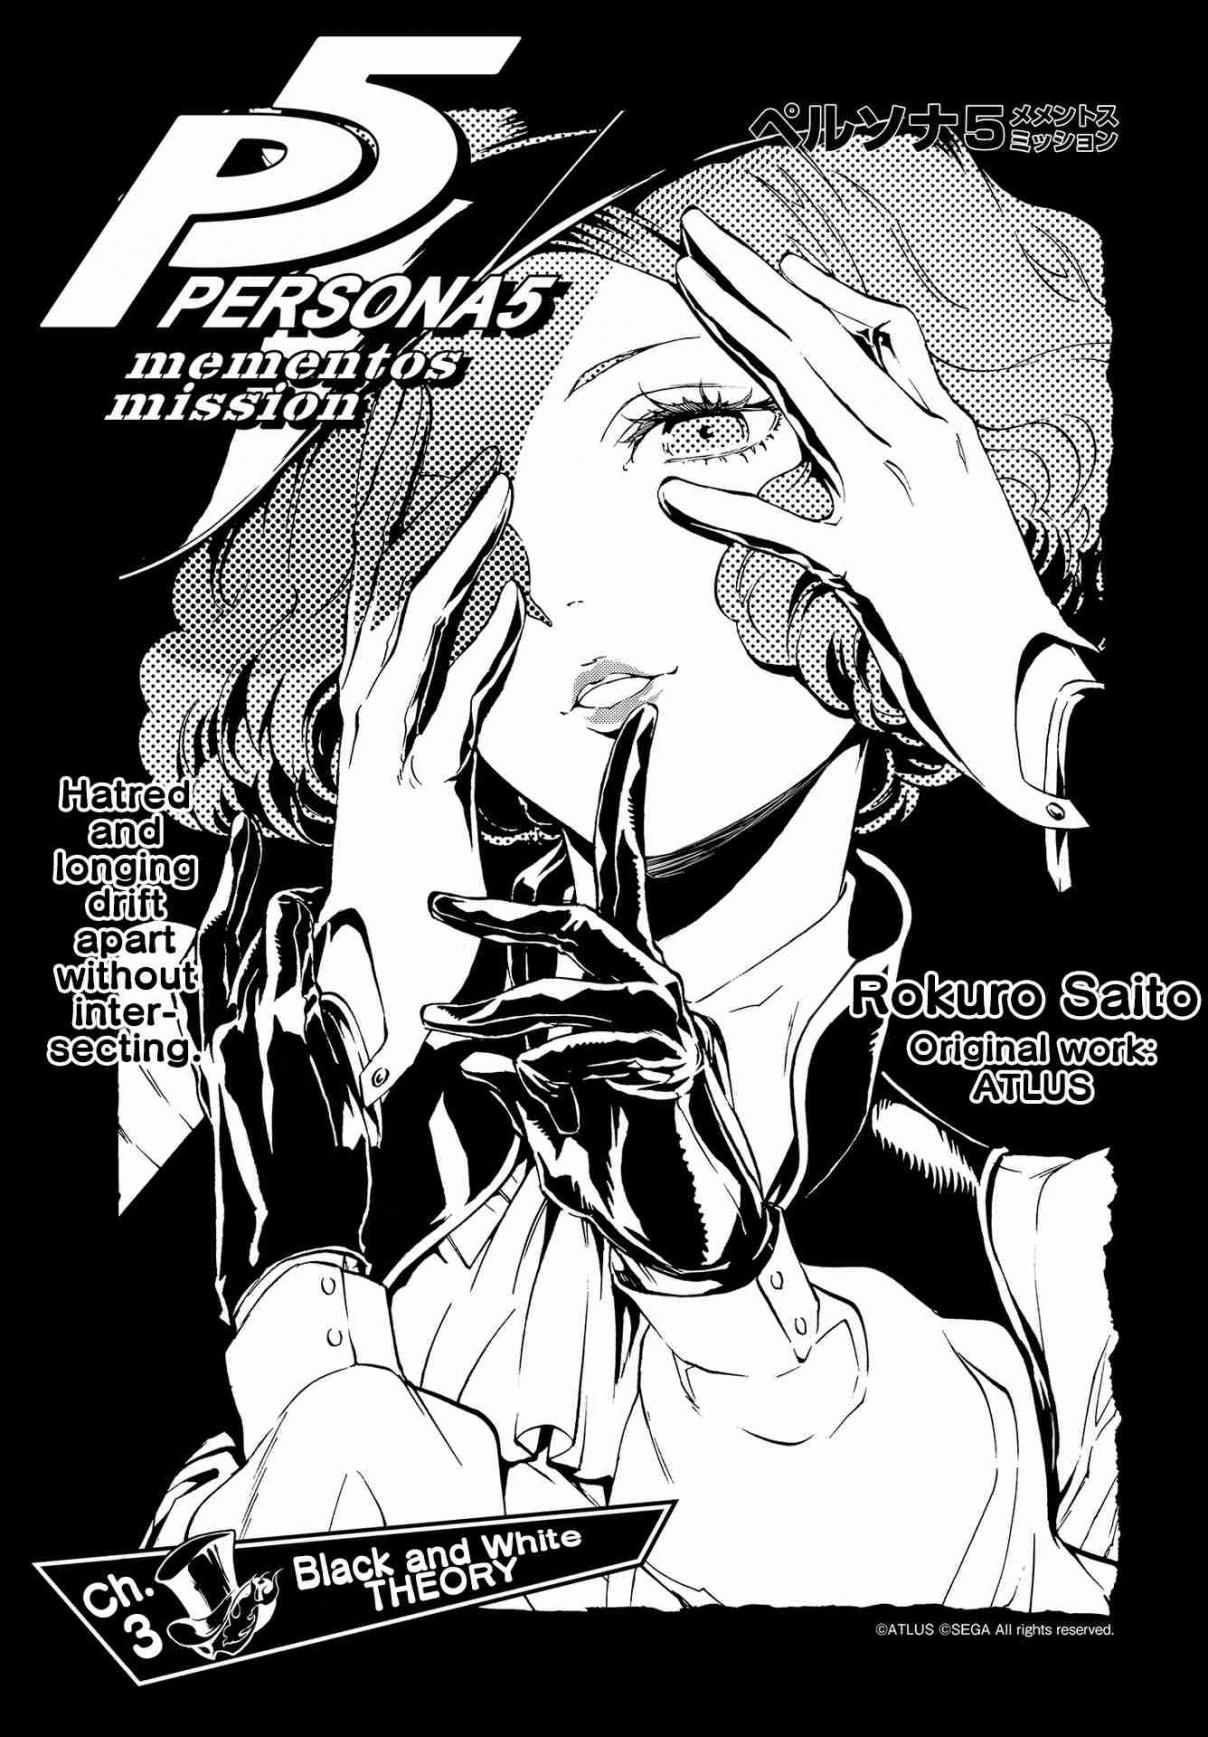 Persona 5 Mementos Mission Vol. 1 Ch. 3 Black and White Theory